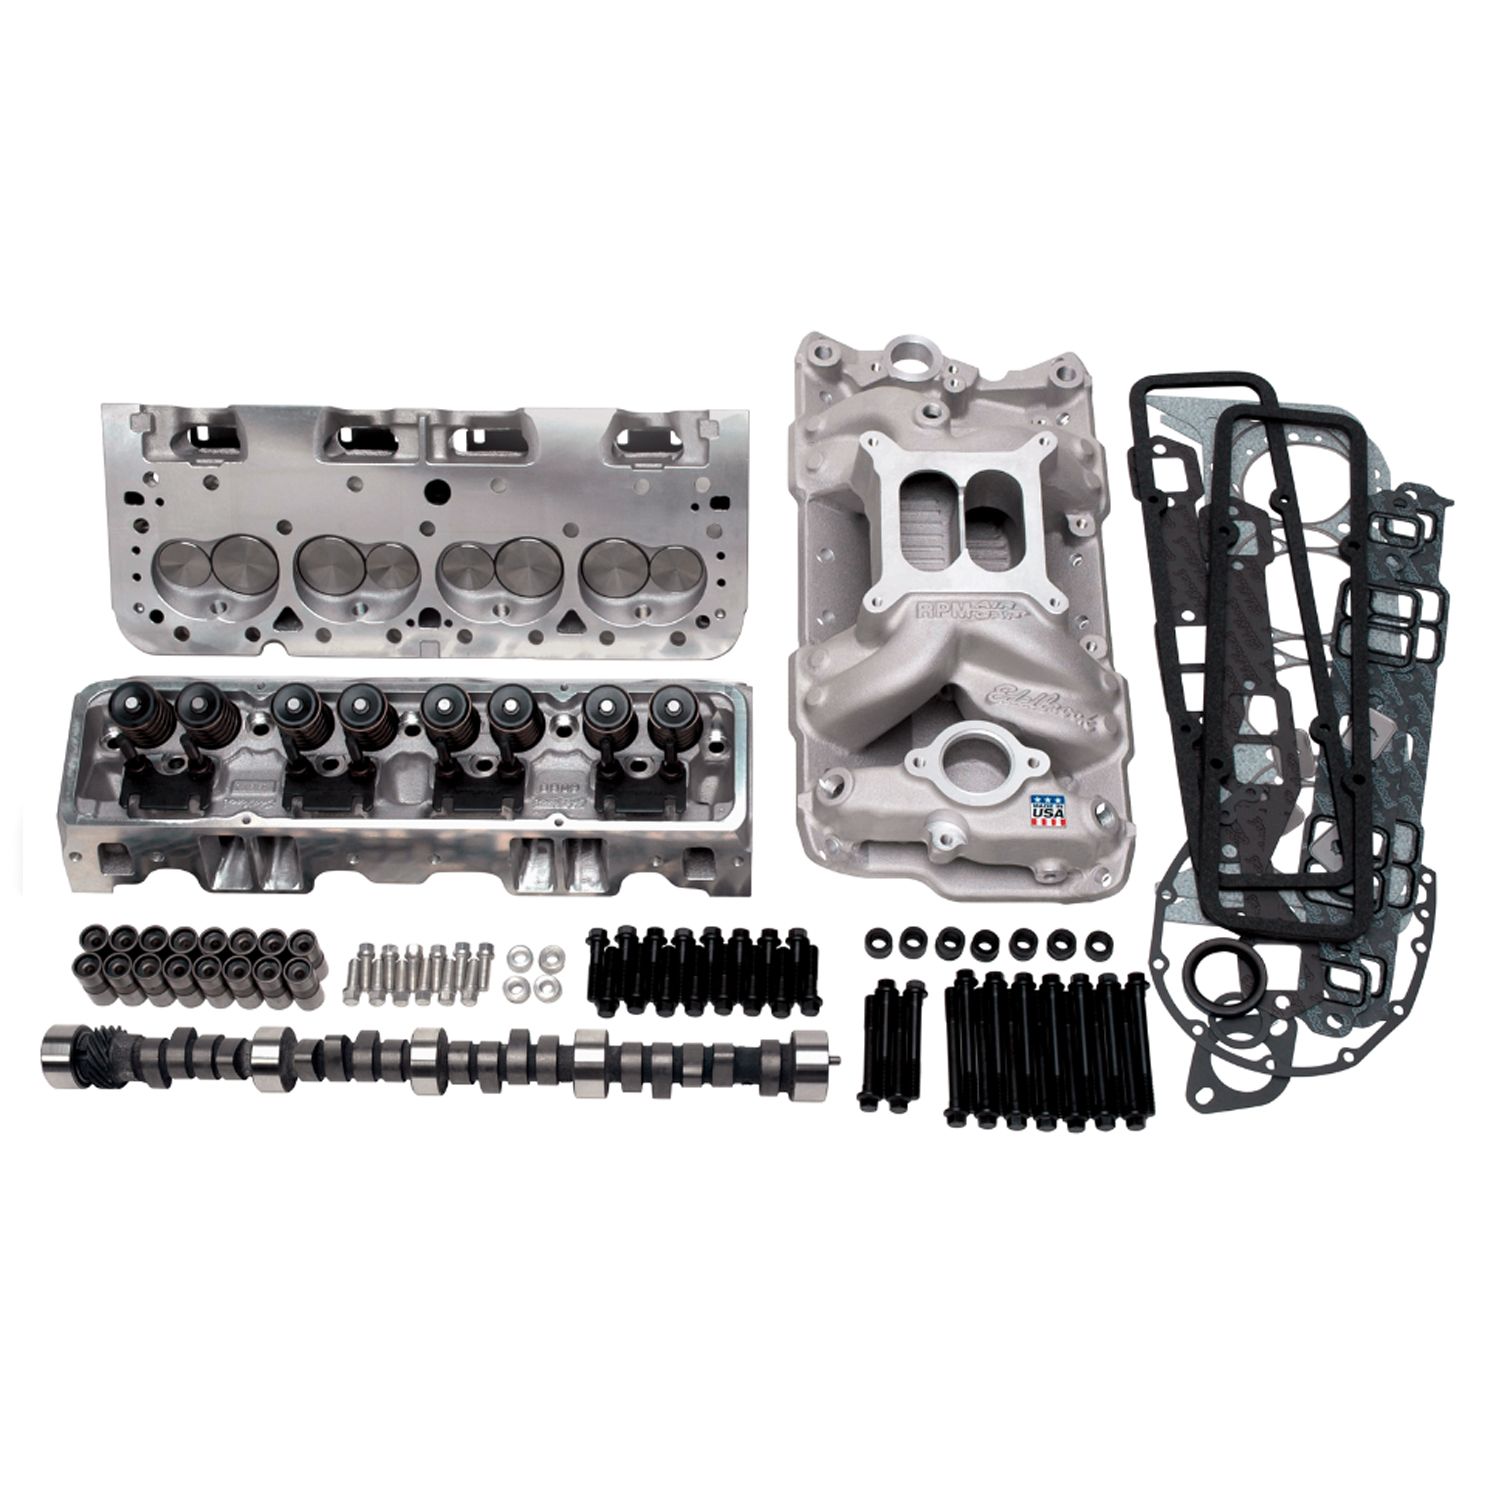 RPM Power Package Top End Kit for 1957-1986 Small Block Chevy 327-350